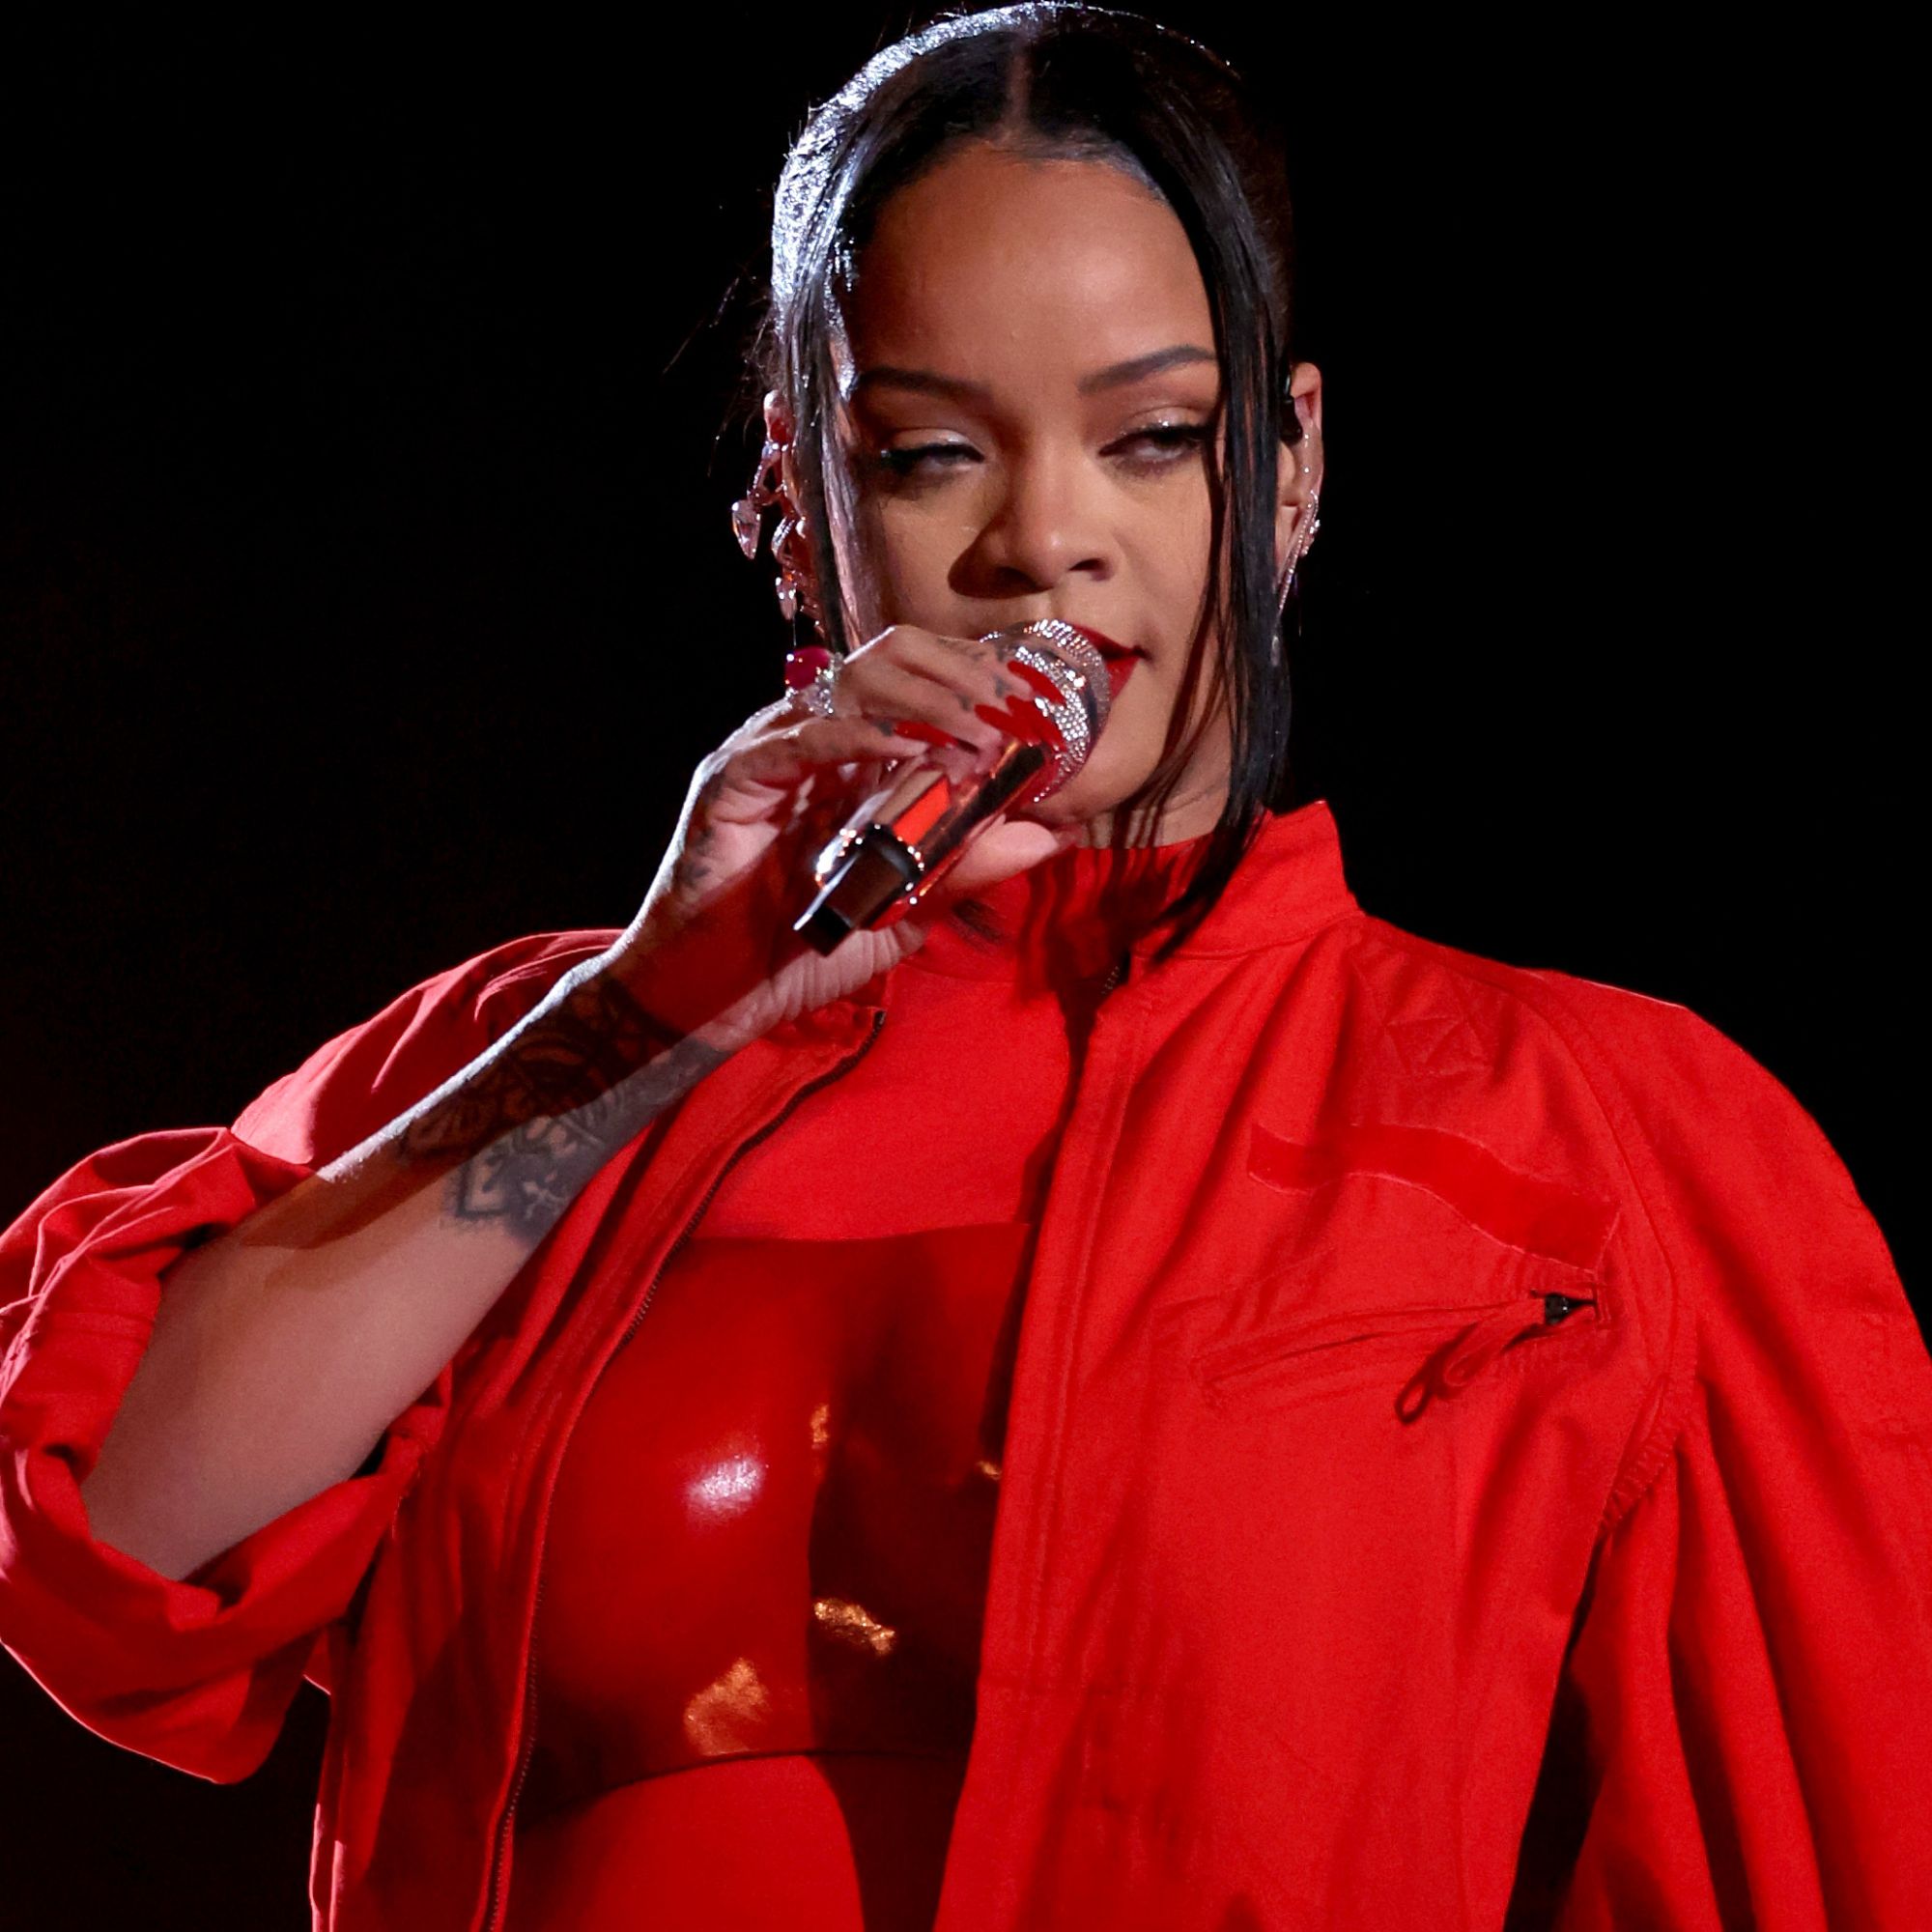 Rihanna's Iconic Look for Her Super Bowl Halftime Performance